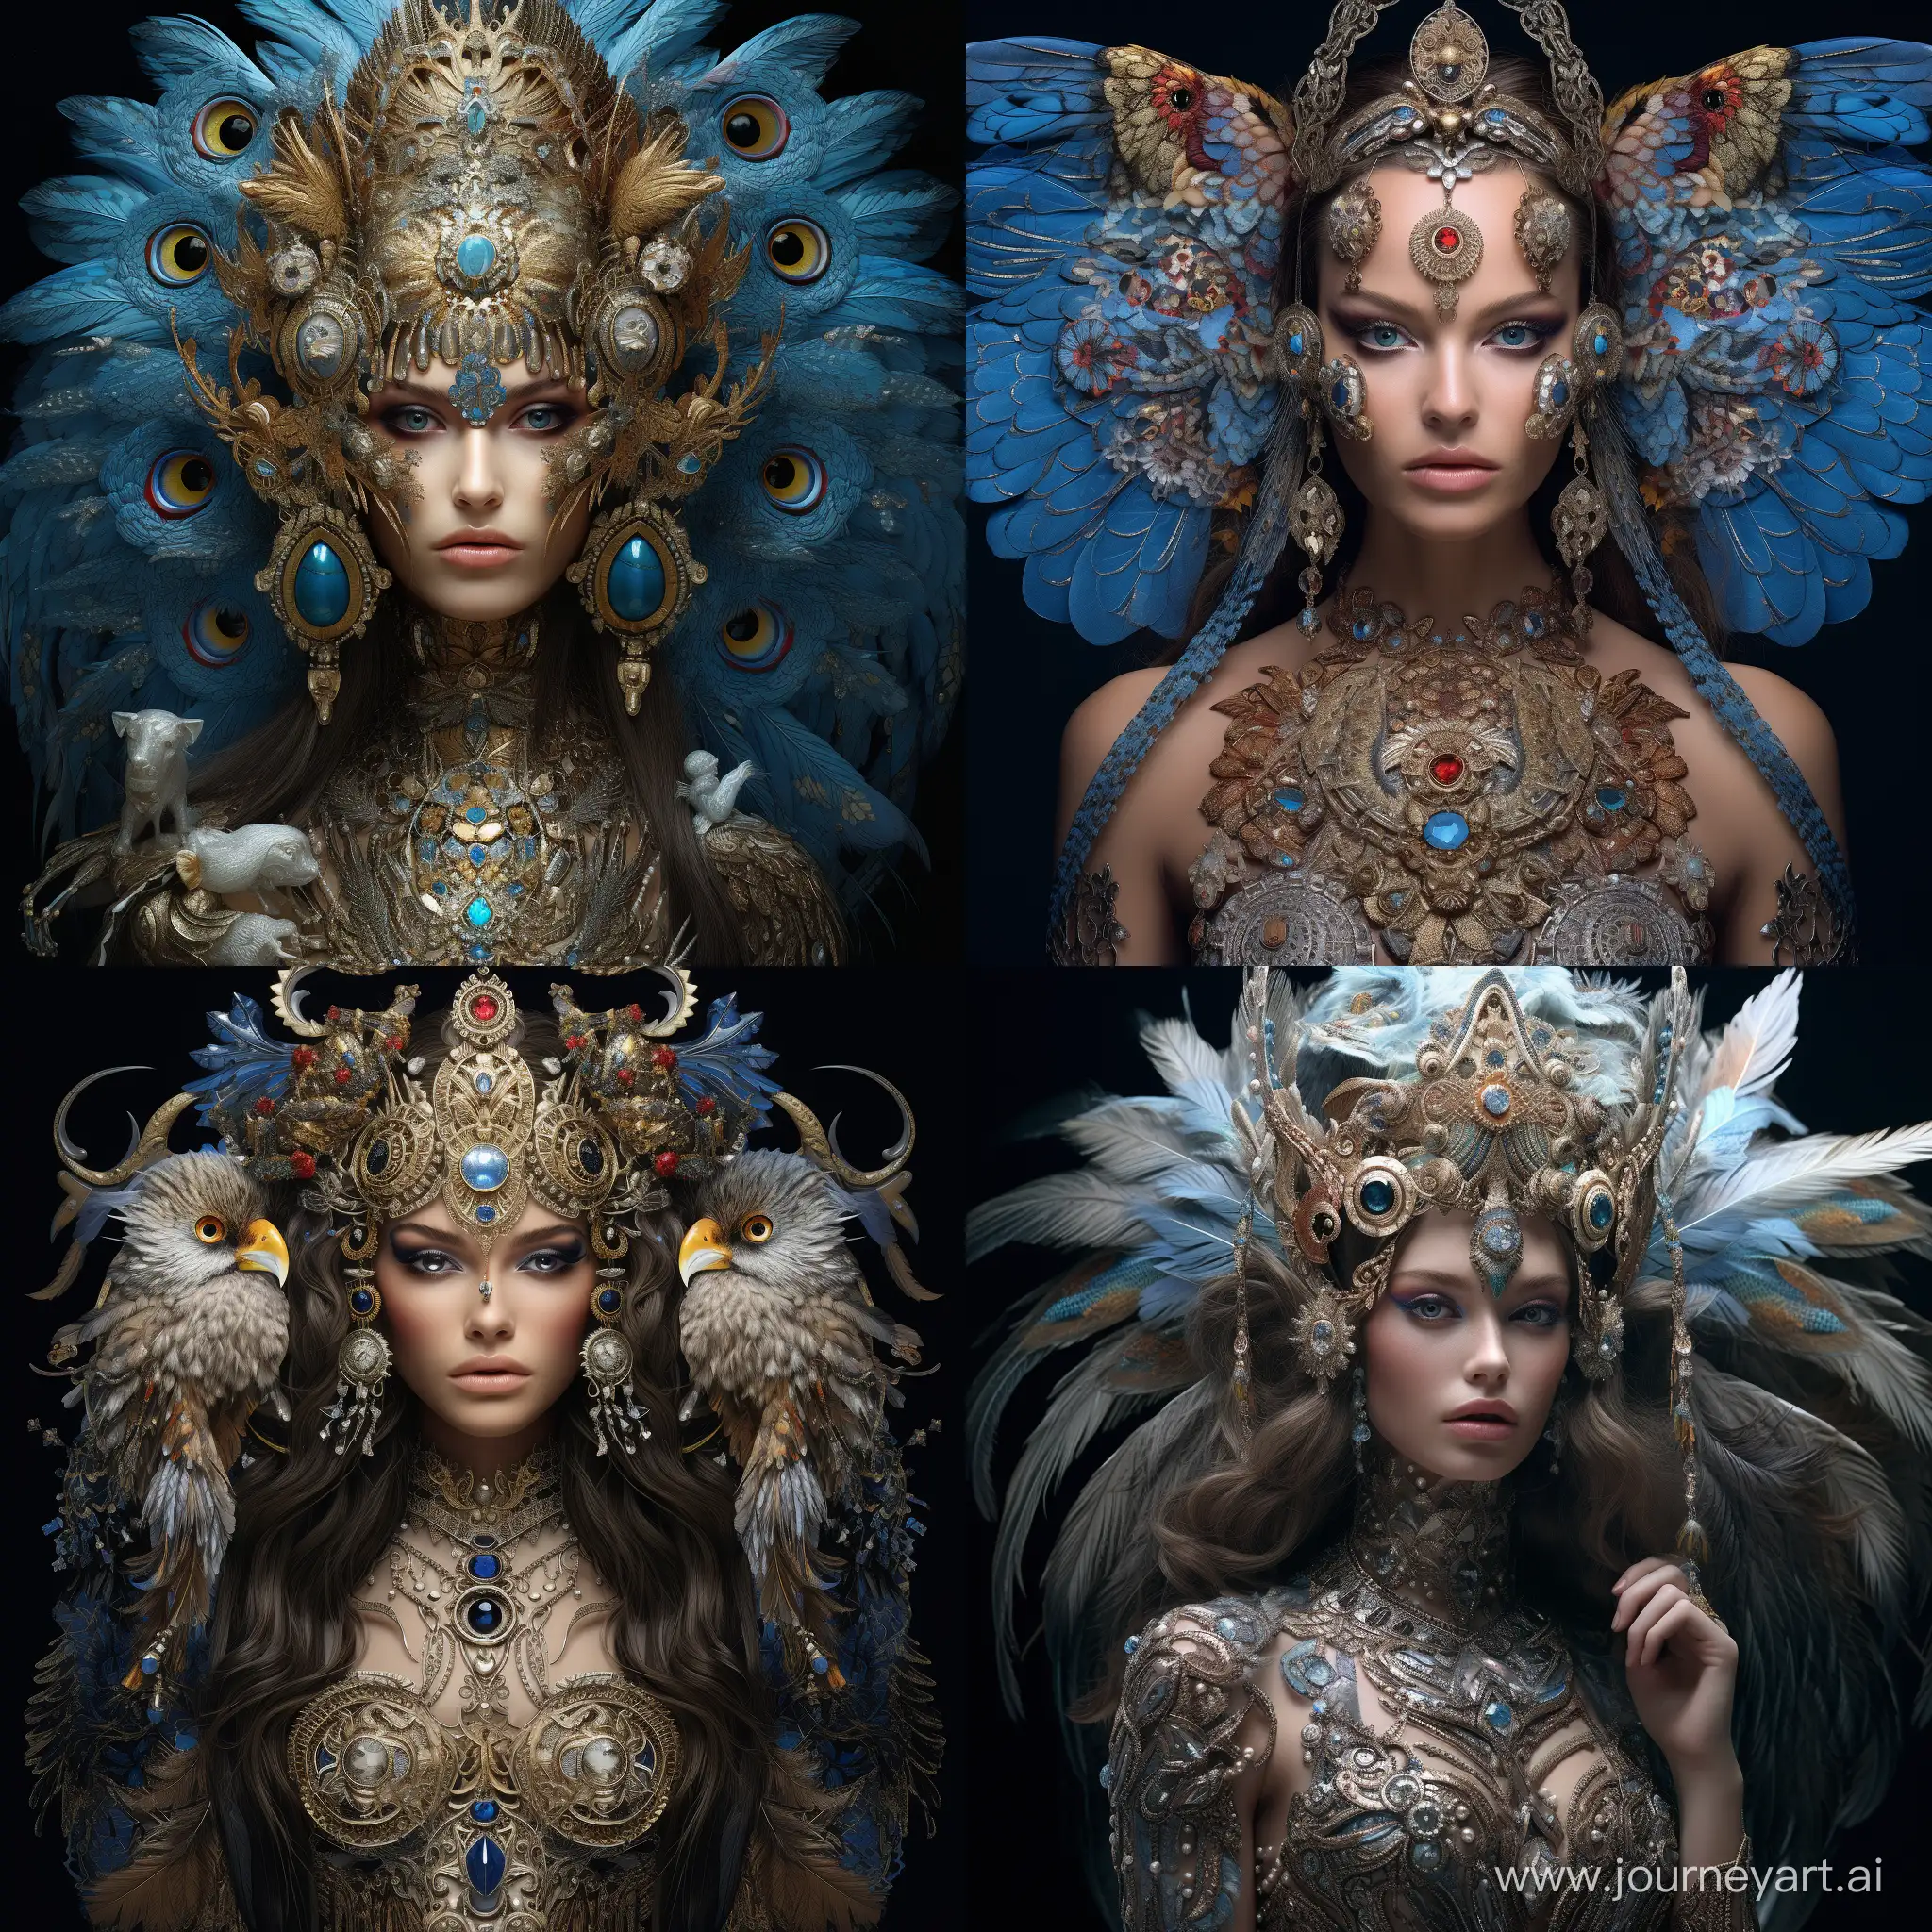 a stunning interpretation of a WOMAN combined with an OWL, a masterpiece, highly detailed and intricate, hypermaximalistic, ornate, luxurious, elite, sinister, decorated with precious stones, sequins, ornamental, cinematic, cgsociety, in the style of realistic and super-detailed images, detailed facial features, intricate jewelry, layered realism, intricately mapped worlds